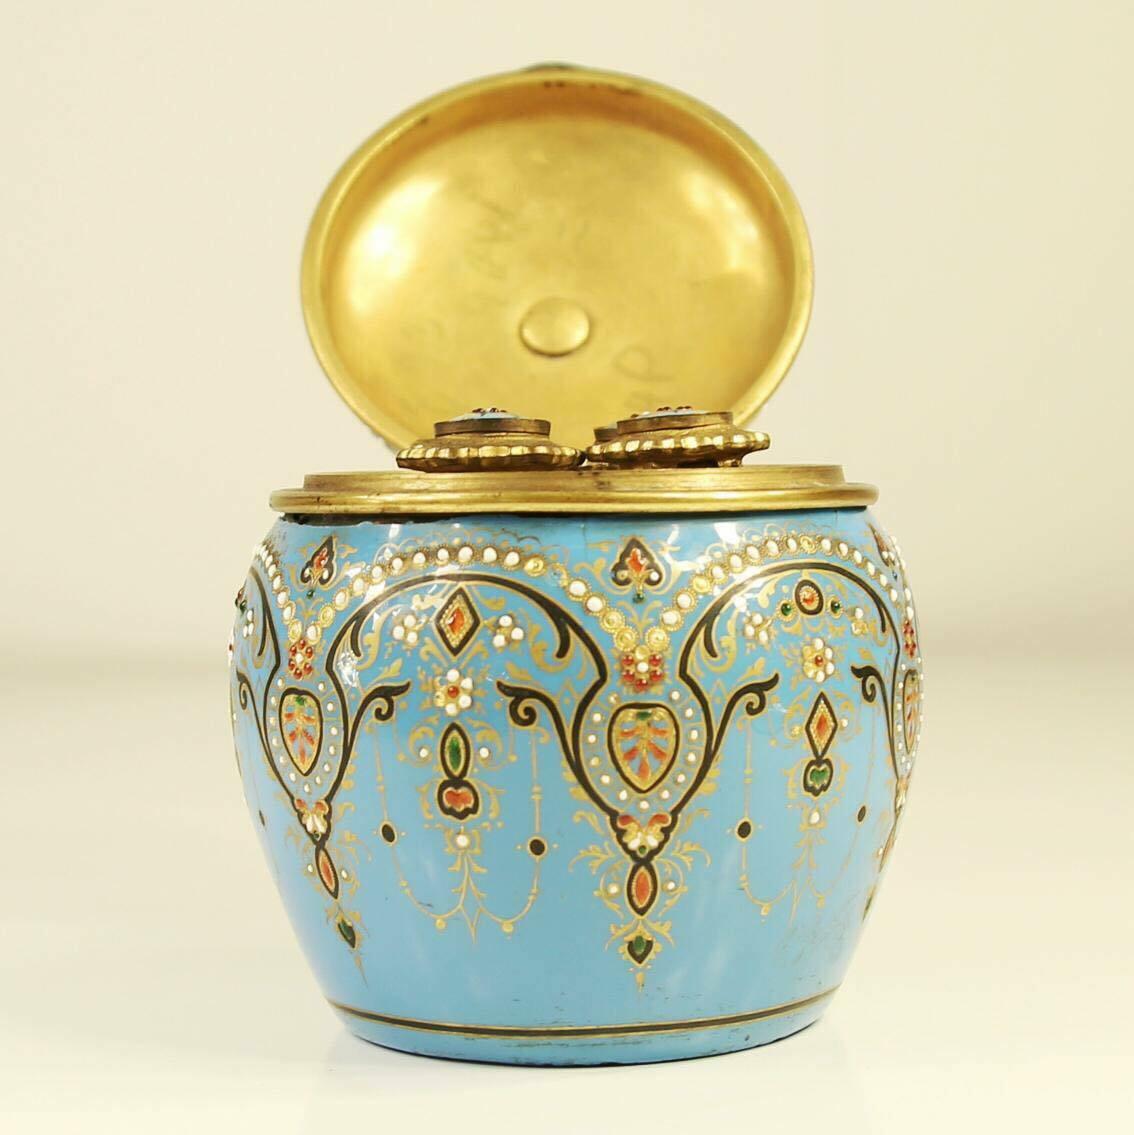 Ceramic French Jeweled Turquoise Enamel Jar Scent Bottles Perfume, 19th Century  For Sale